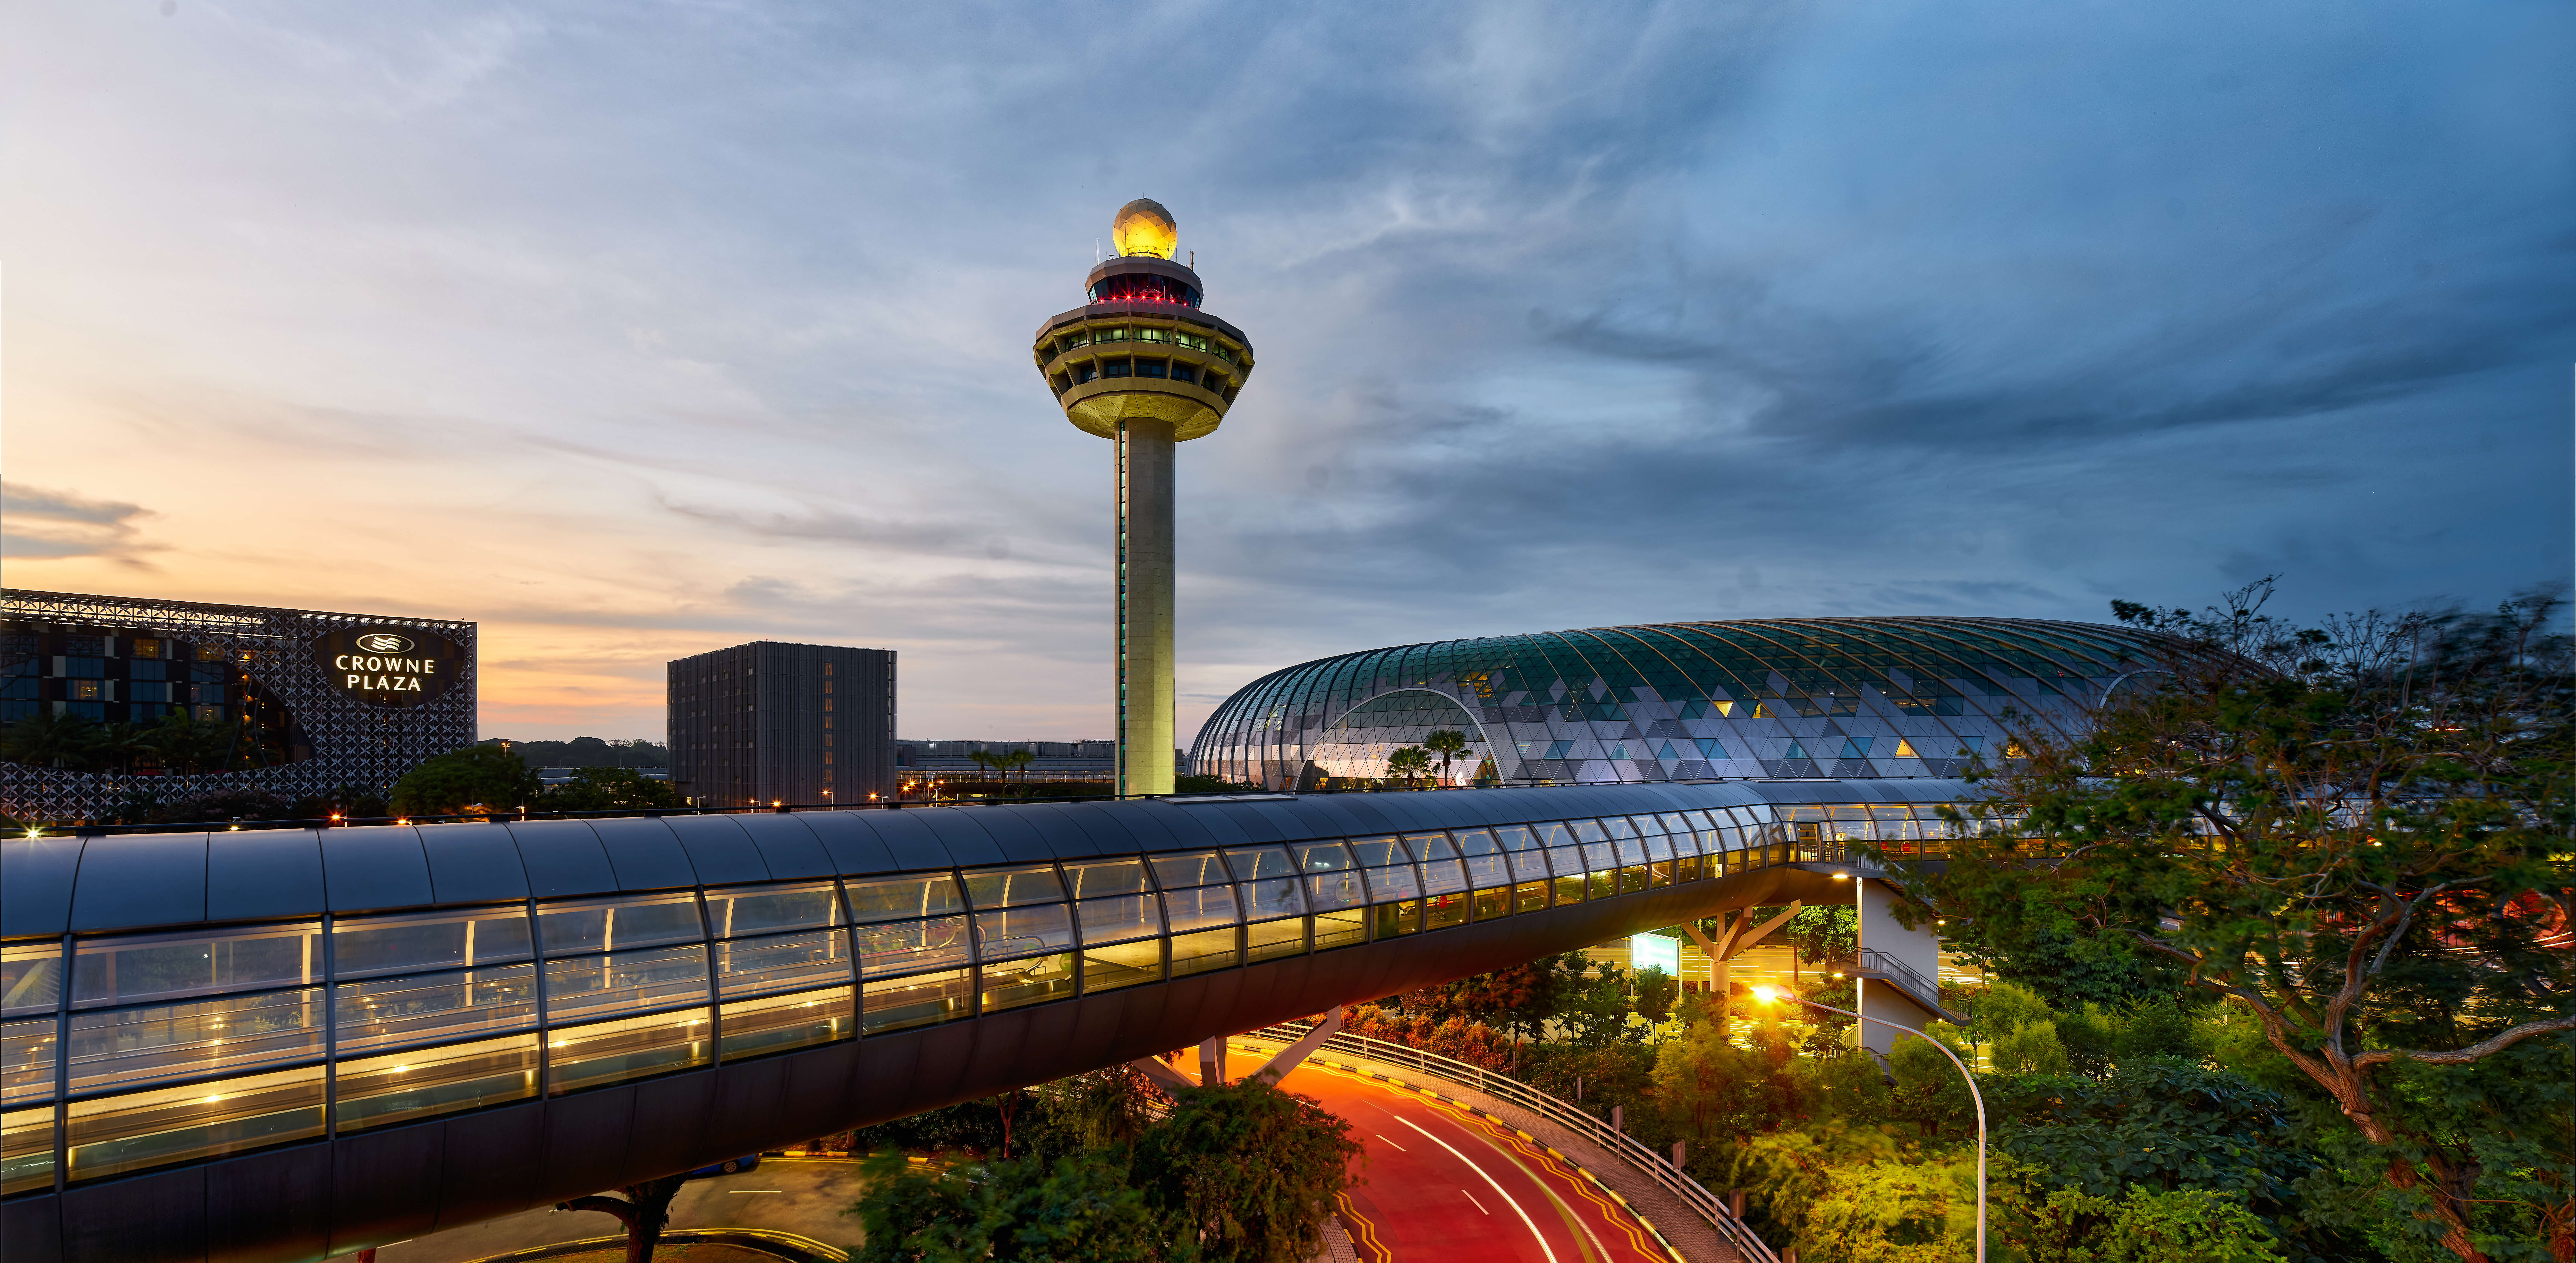 Built in 1981 over an exisitng runway built during the Japanese Occupation, Changi Airport continues to expand today, with Terminal 5 and a third runway slated for completion in the 2030s. 